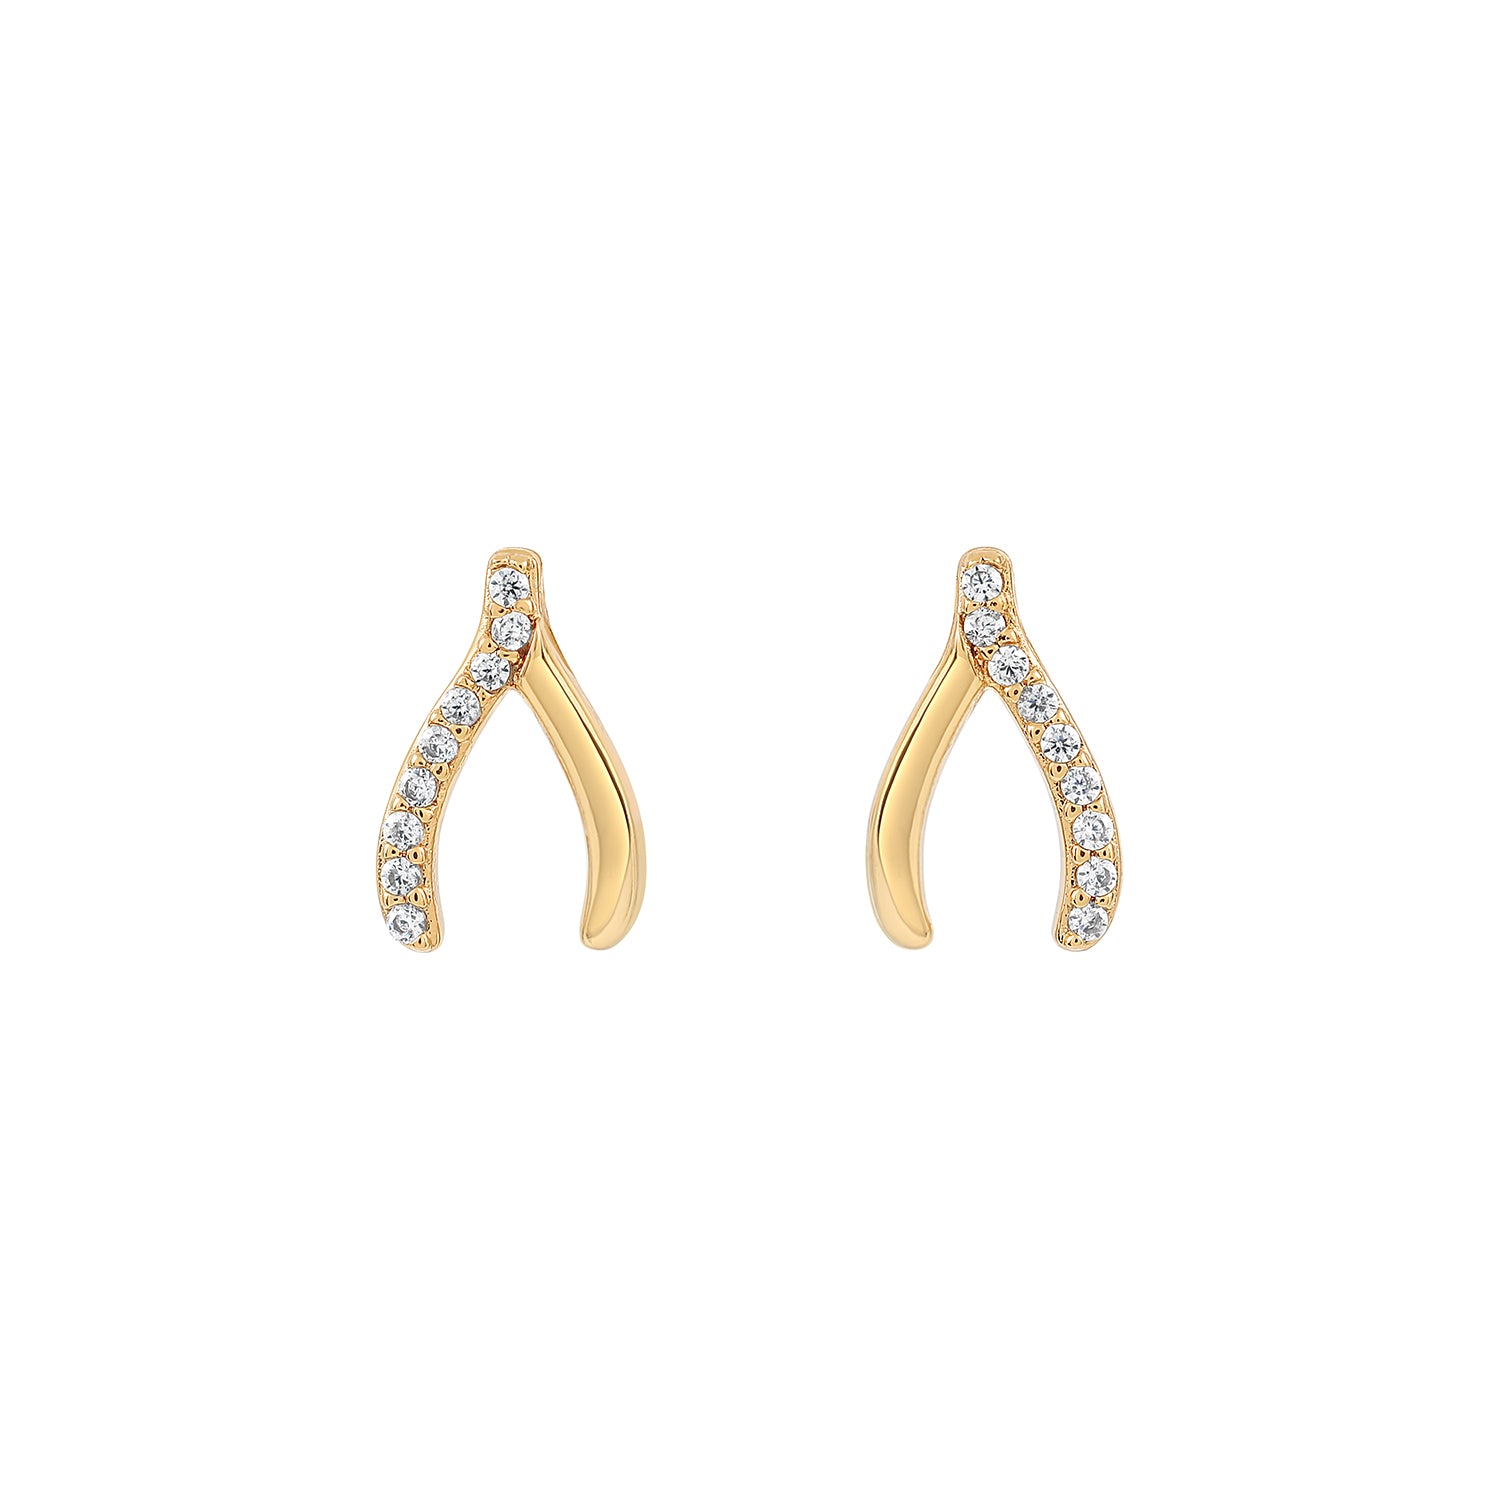 Elegant and statement earrings. Gold wishbone studs set with cubic zirconia stones.